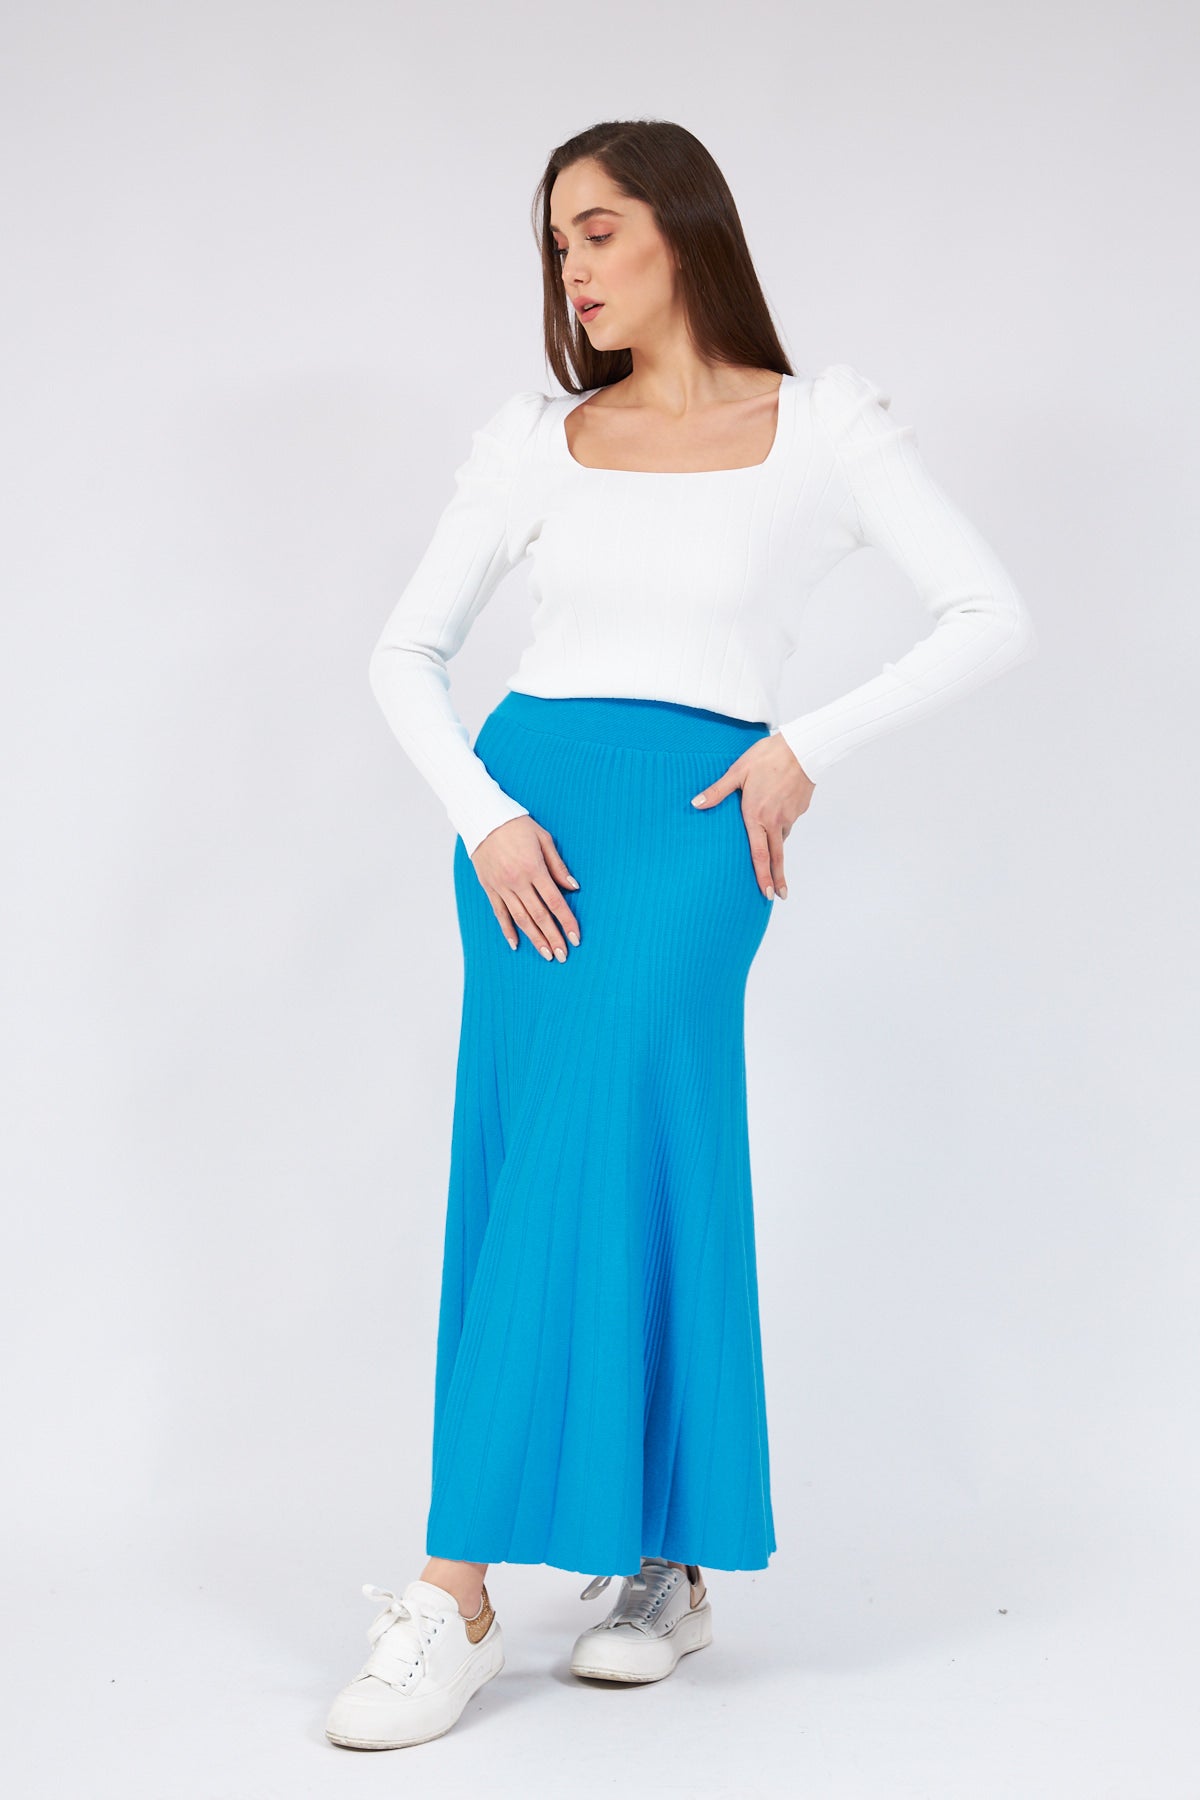 Turquoise Thick Corduroy Knit Skirt - Lebbse